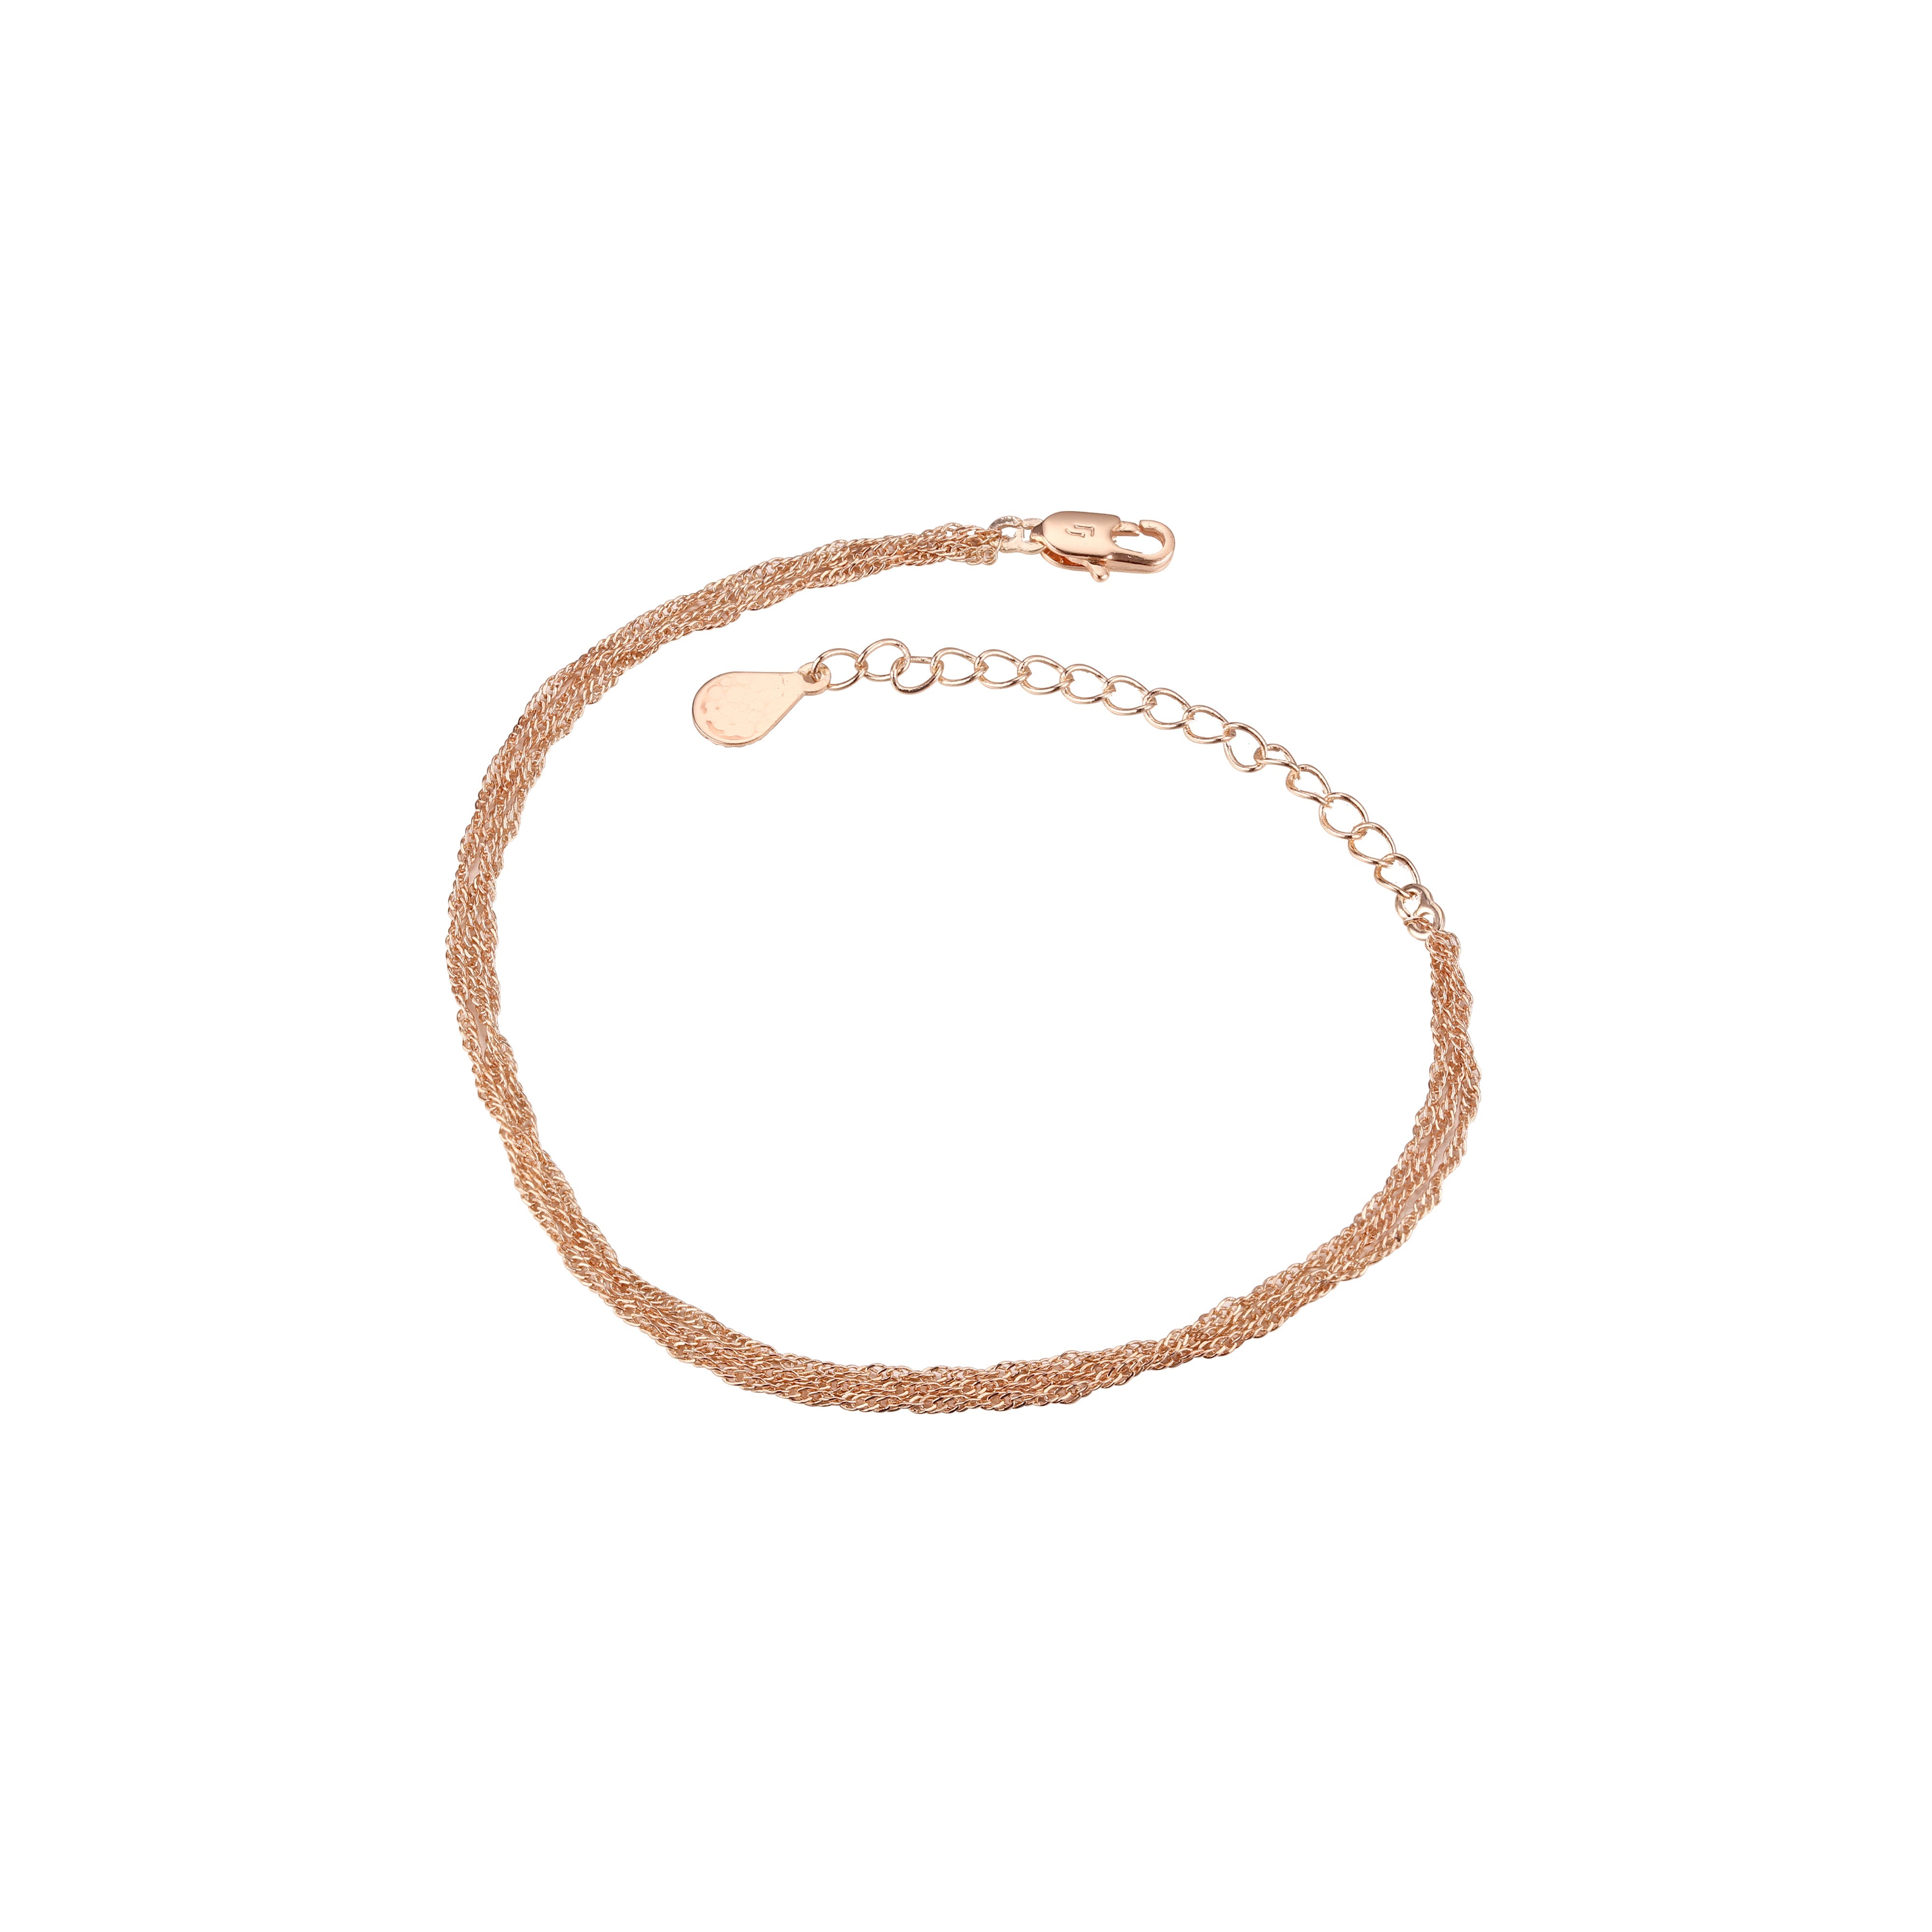 Triple Singapore single link chains plated in Rose Gold